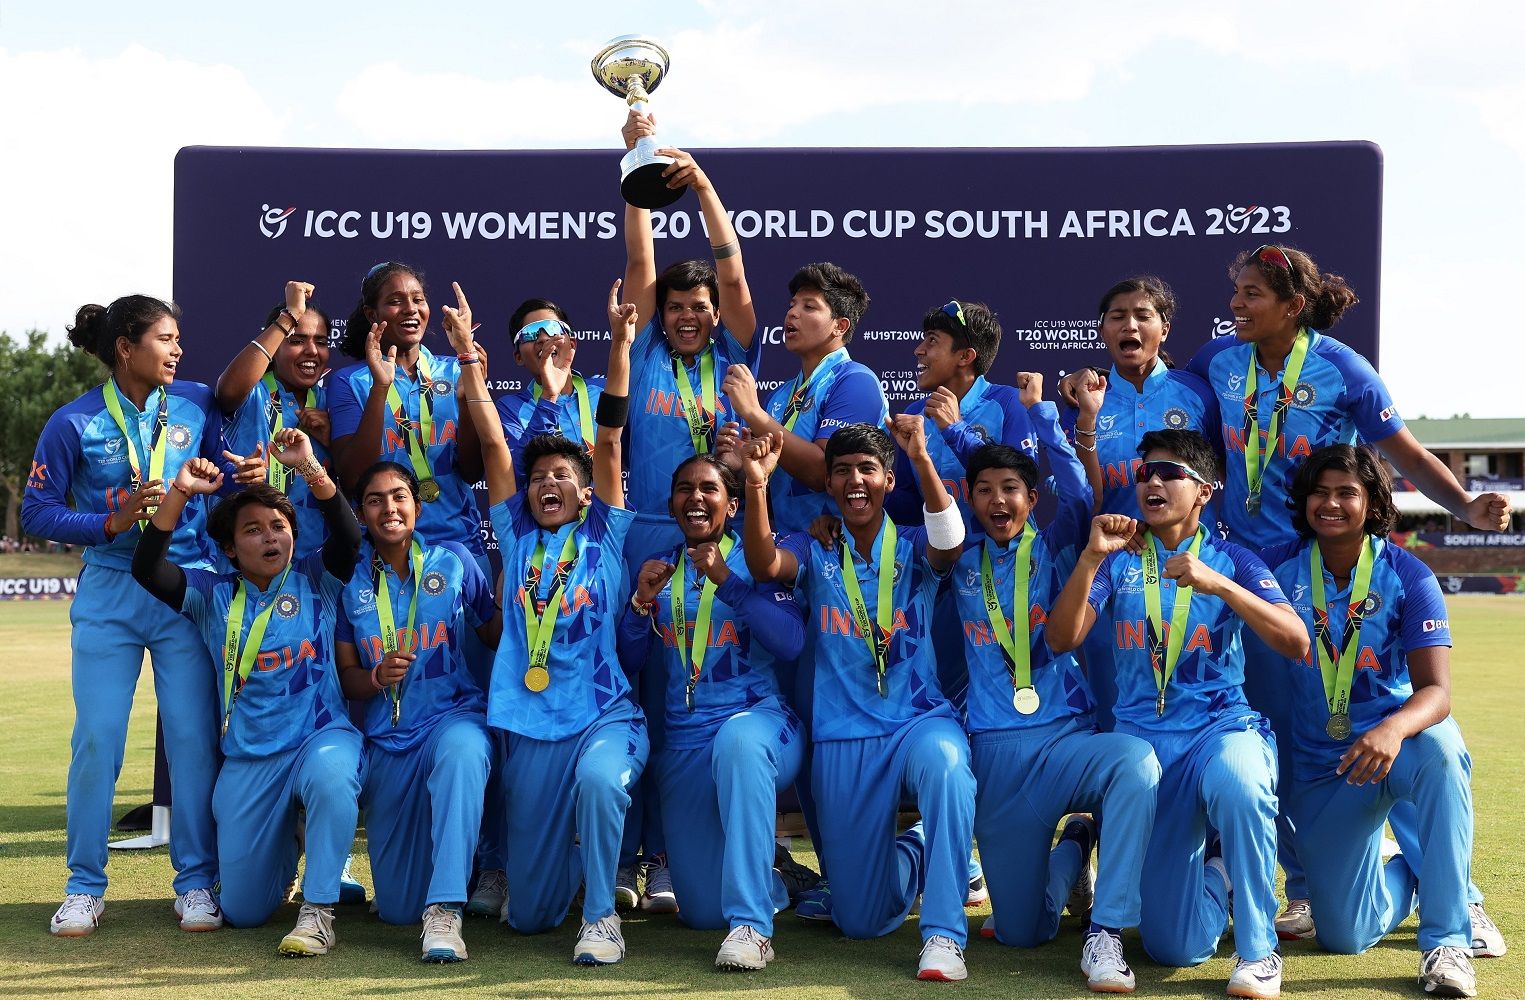 Team India has created history by winning the first edition of this World Cup.